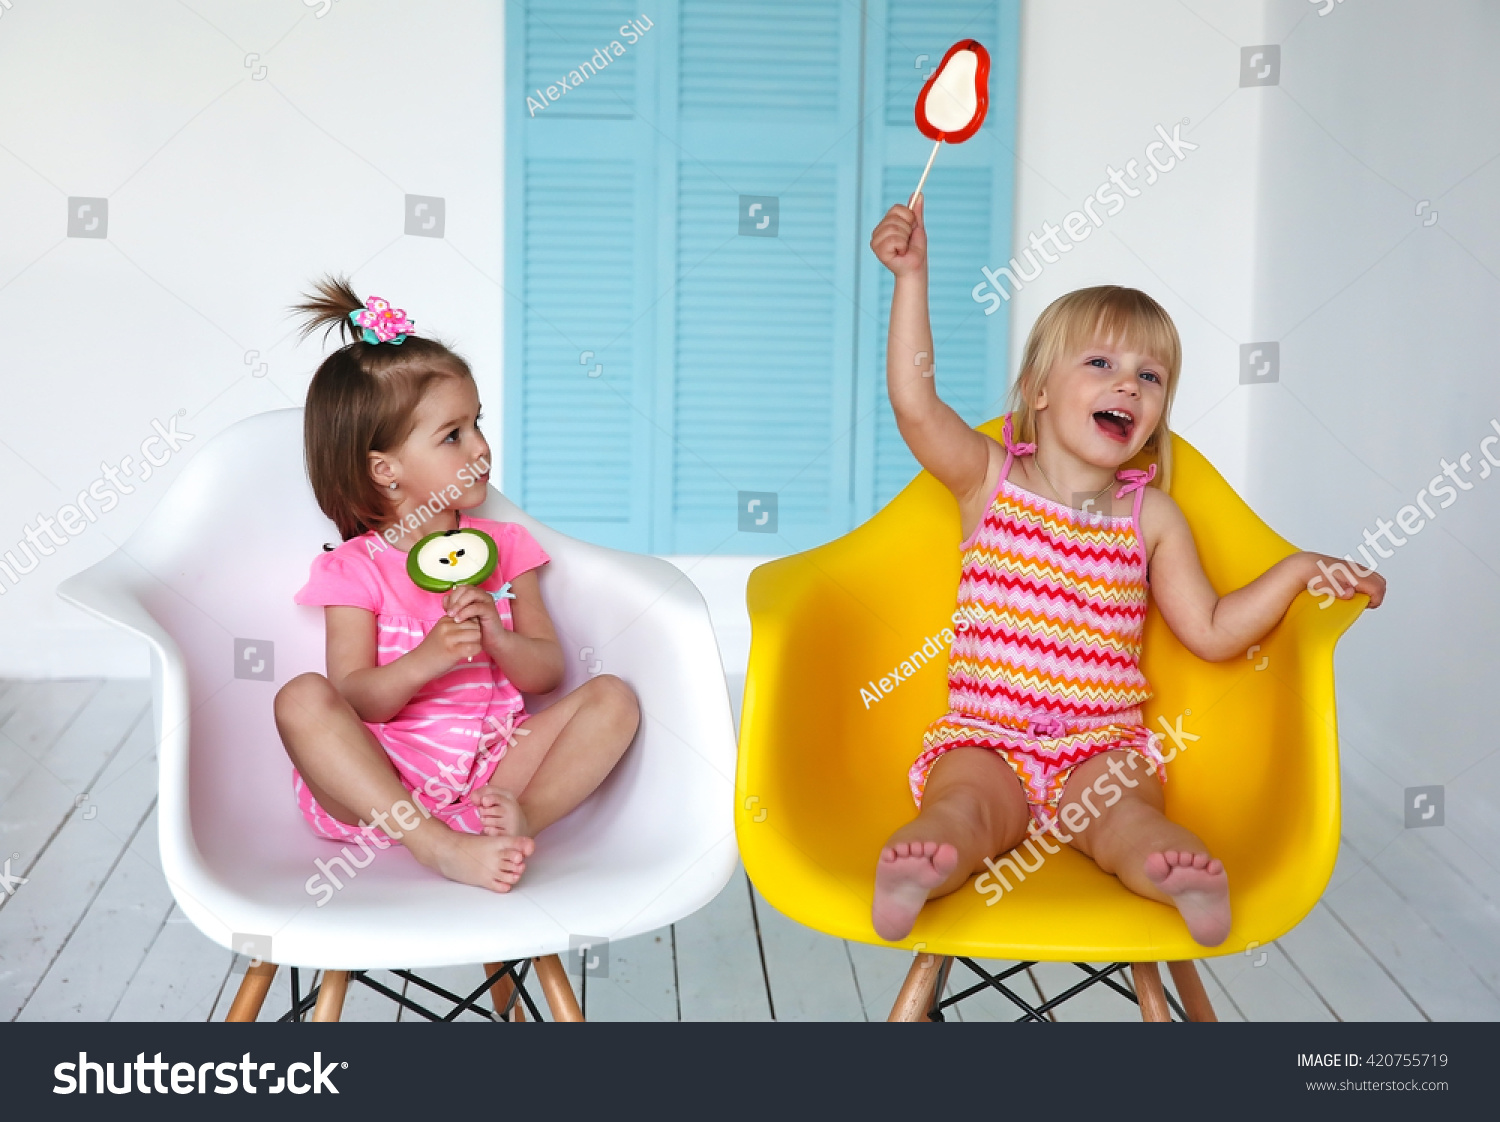 chairs for little girls